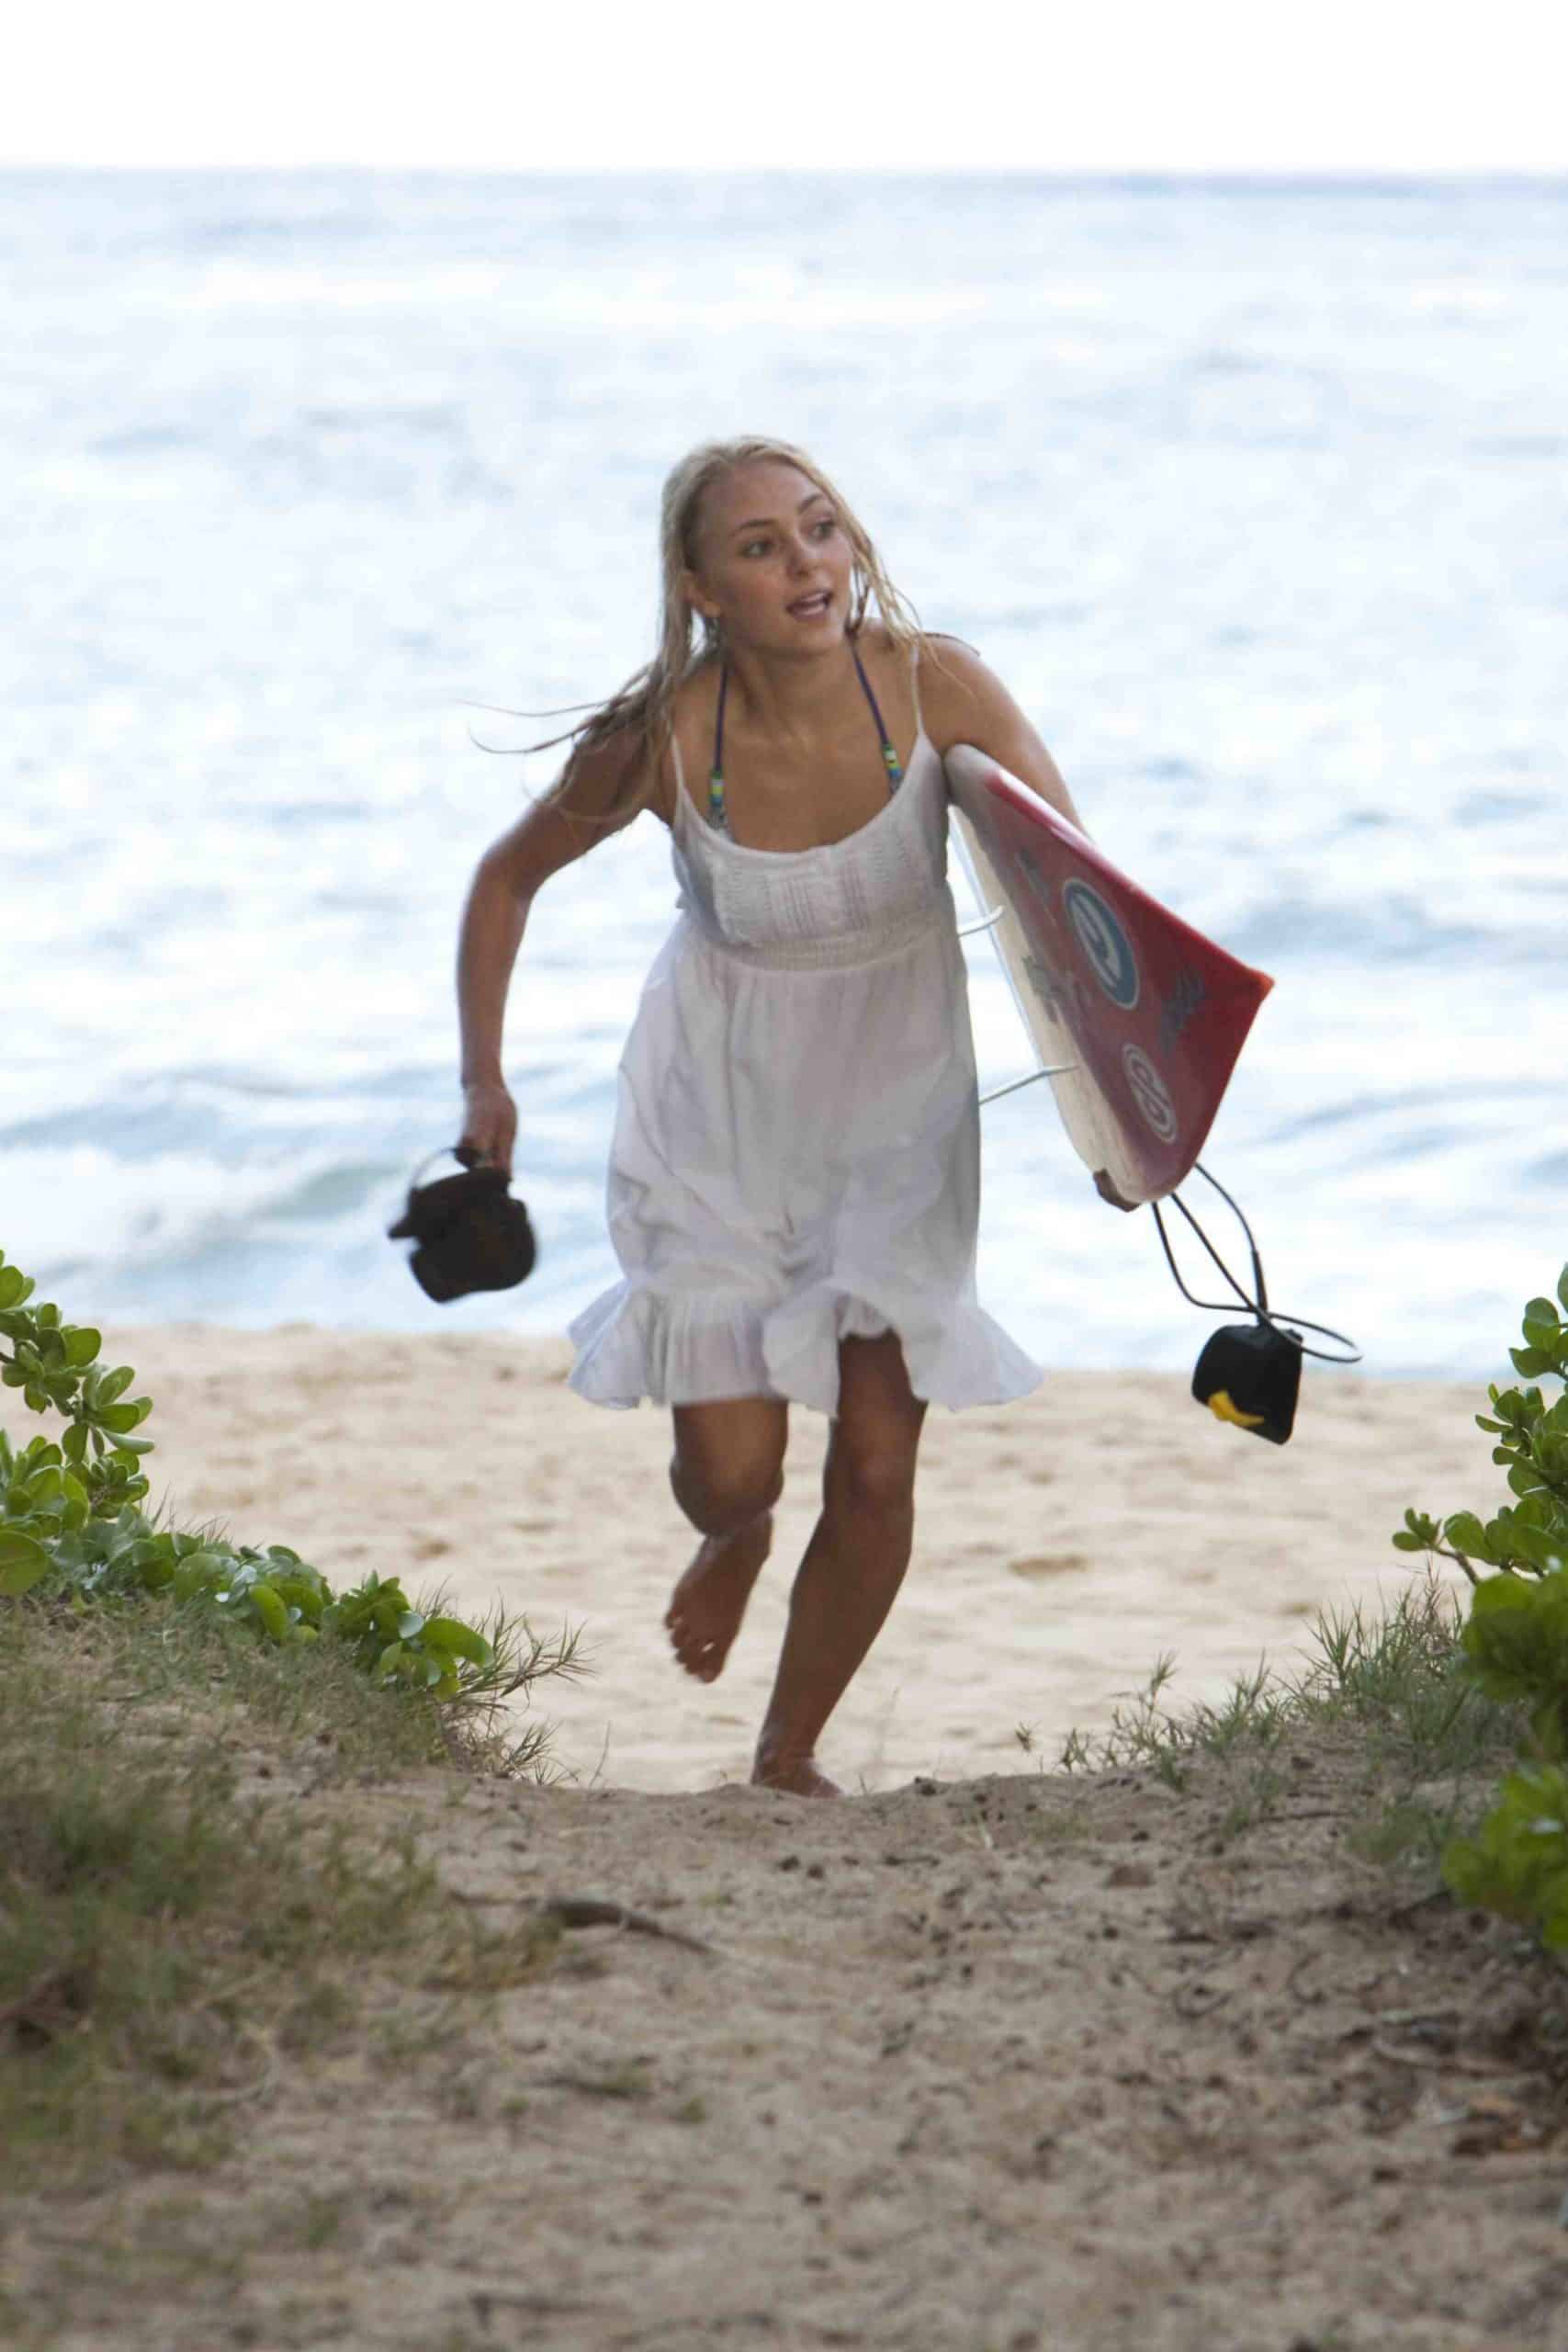 Does the real Bethany Hamilton appear in Soul Surfer?